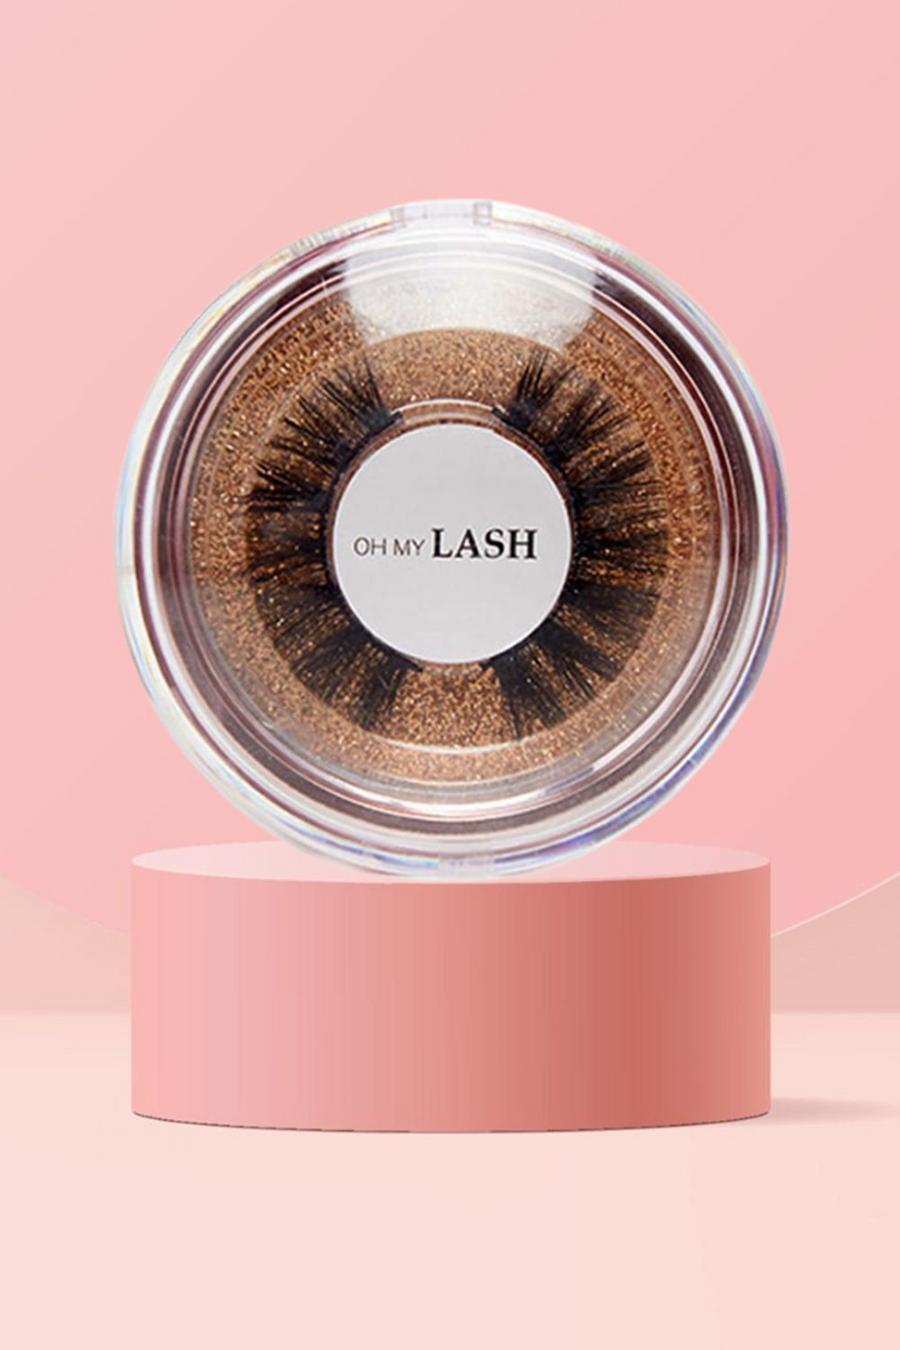 Oh My Lash - Faux-cils - Luxe, Or metallic